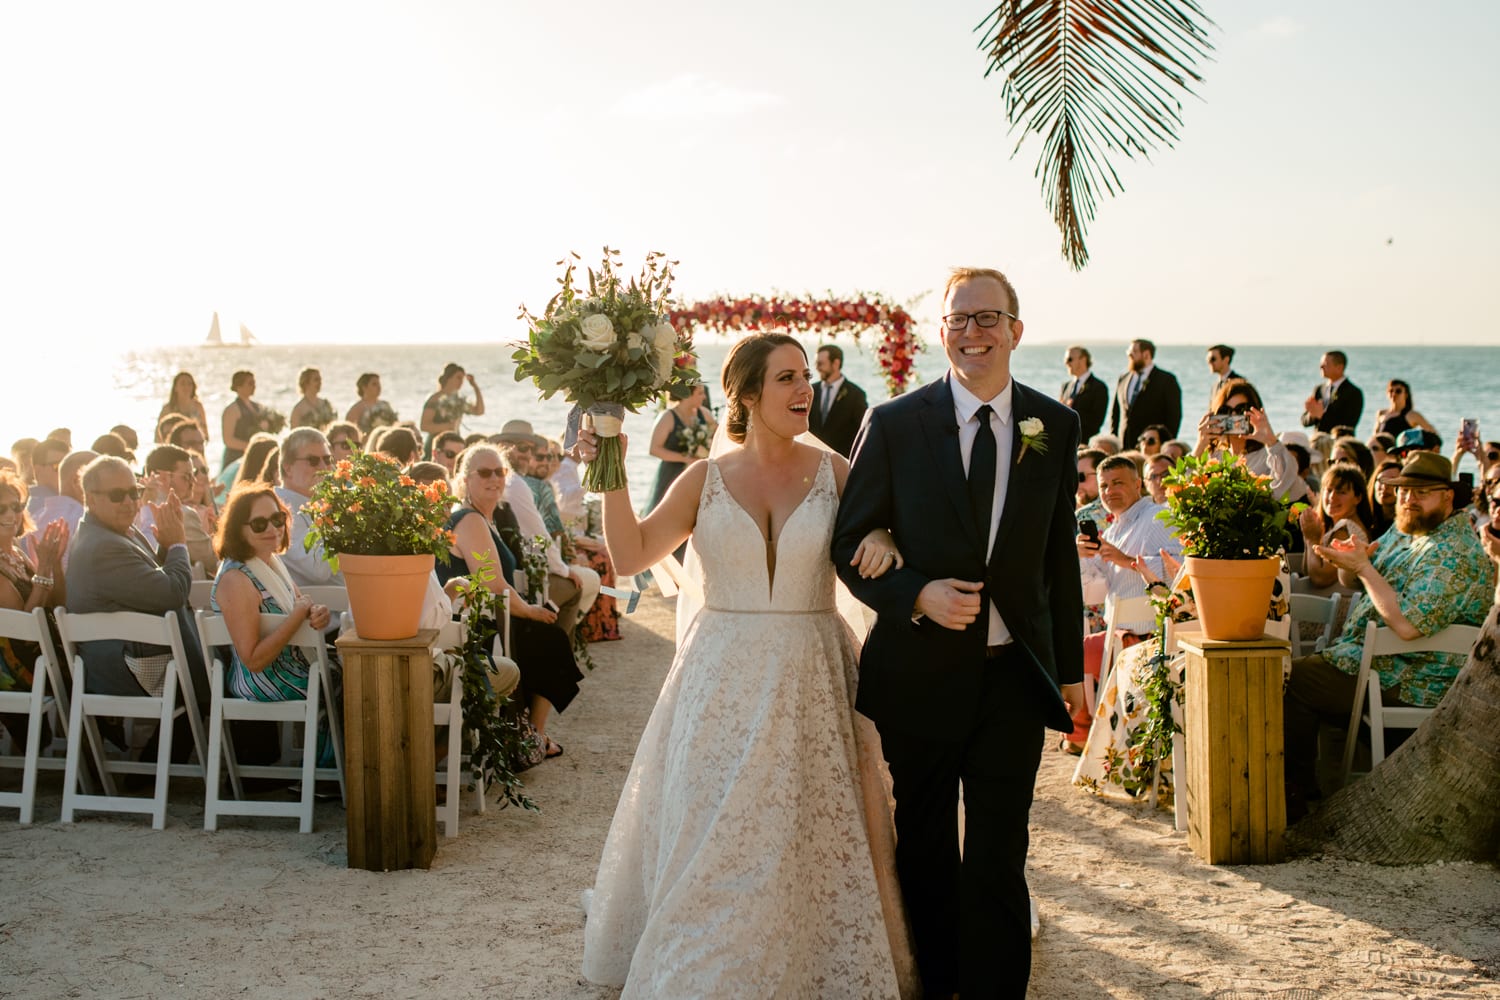 A bride and groom walking down the aisle at a beach wedding at Fort Zachary Taylor.